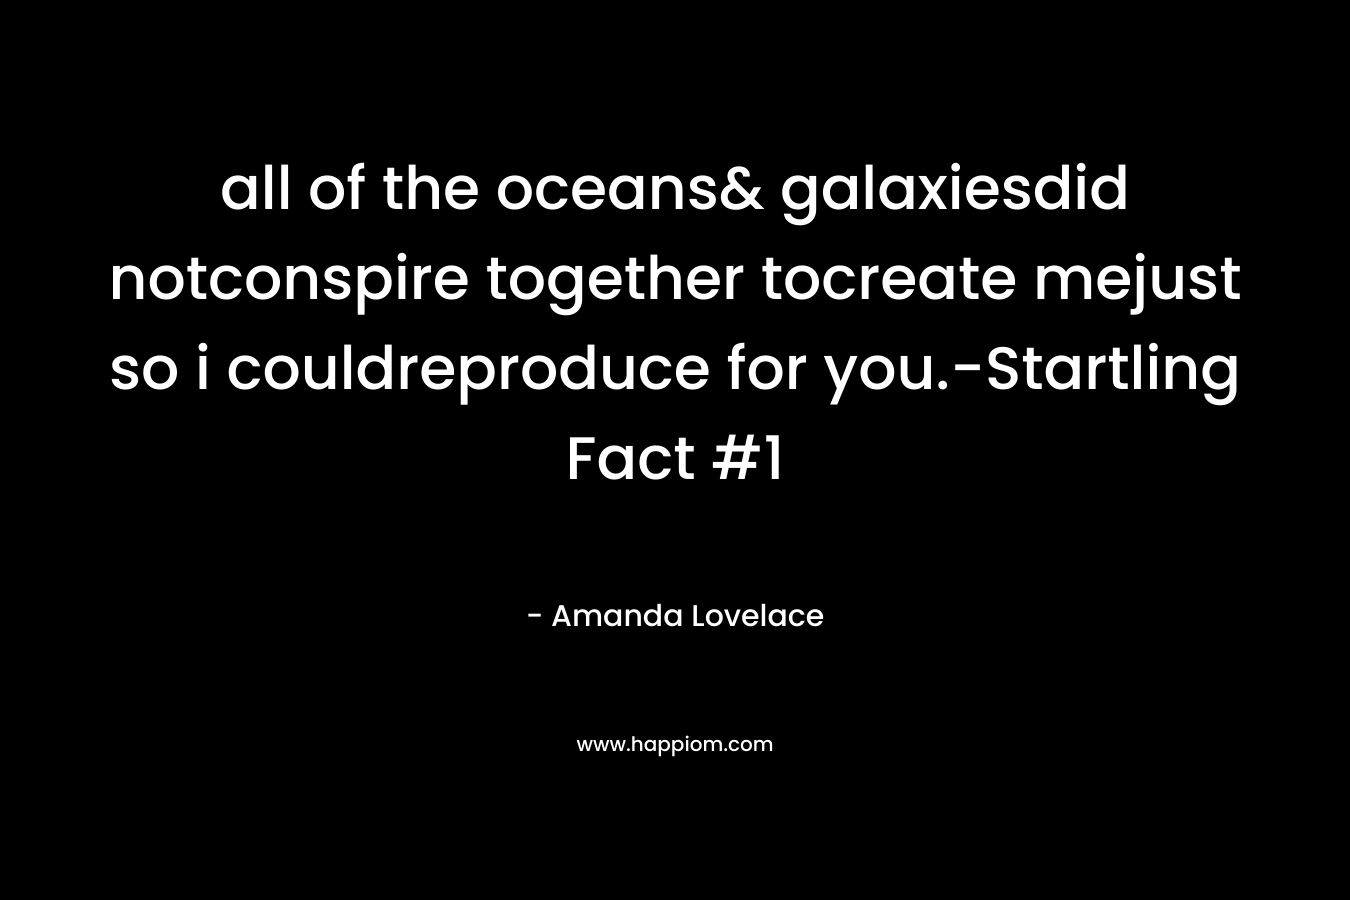 all of the oceans& galaxiesdid notconspire together tocreate mejust so i couldreproduce for you.-Startling Fact #1